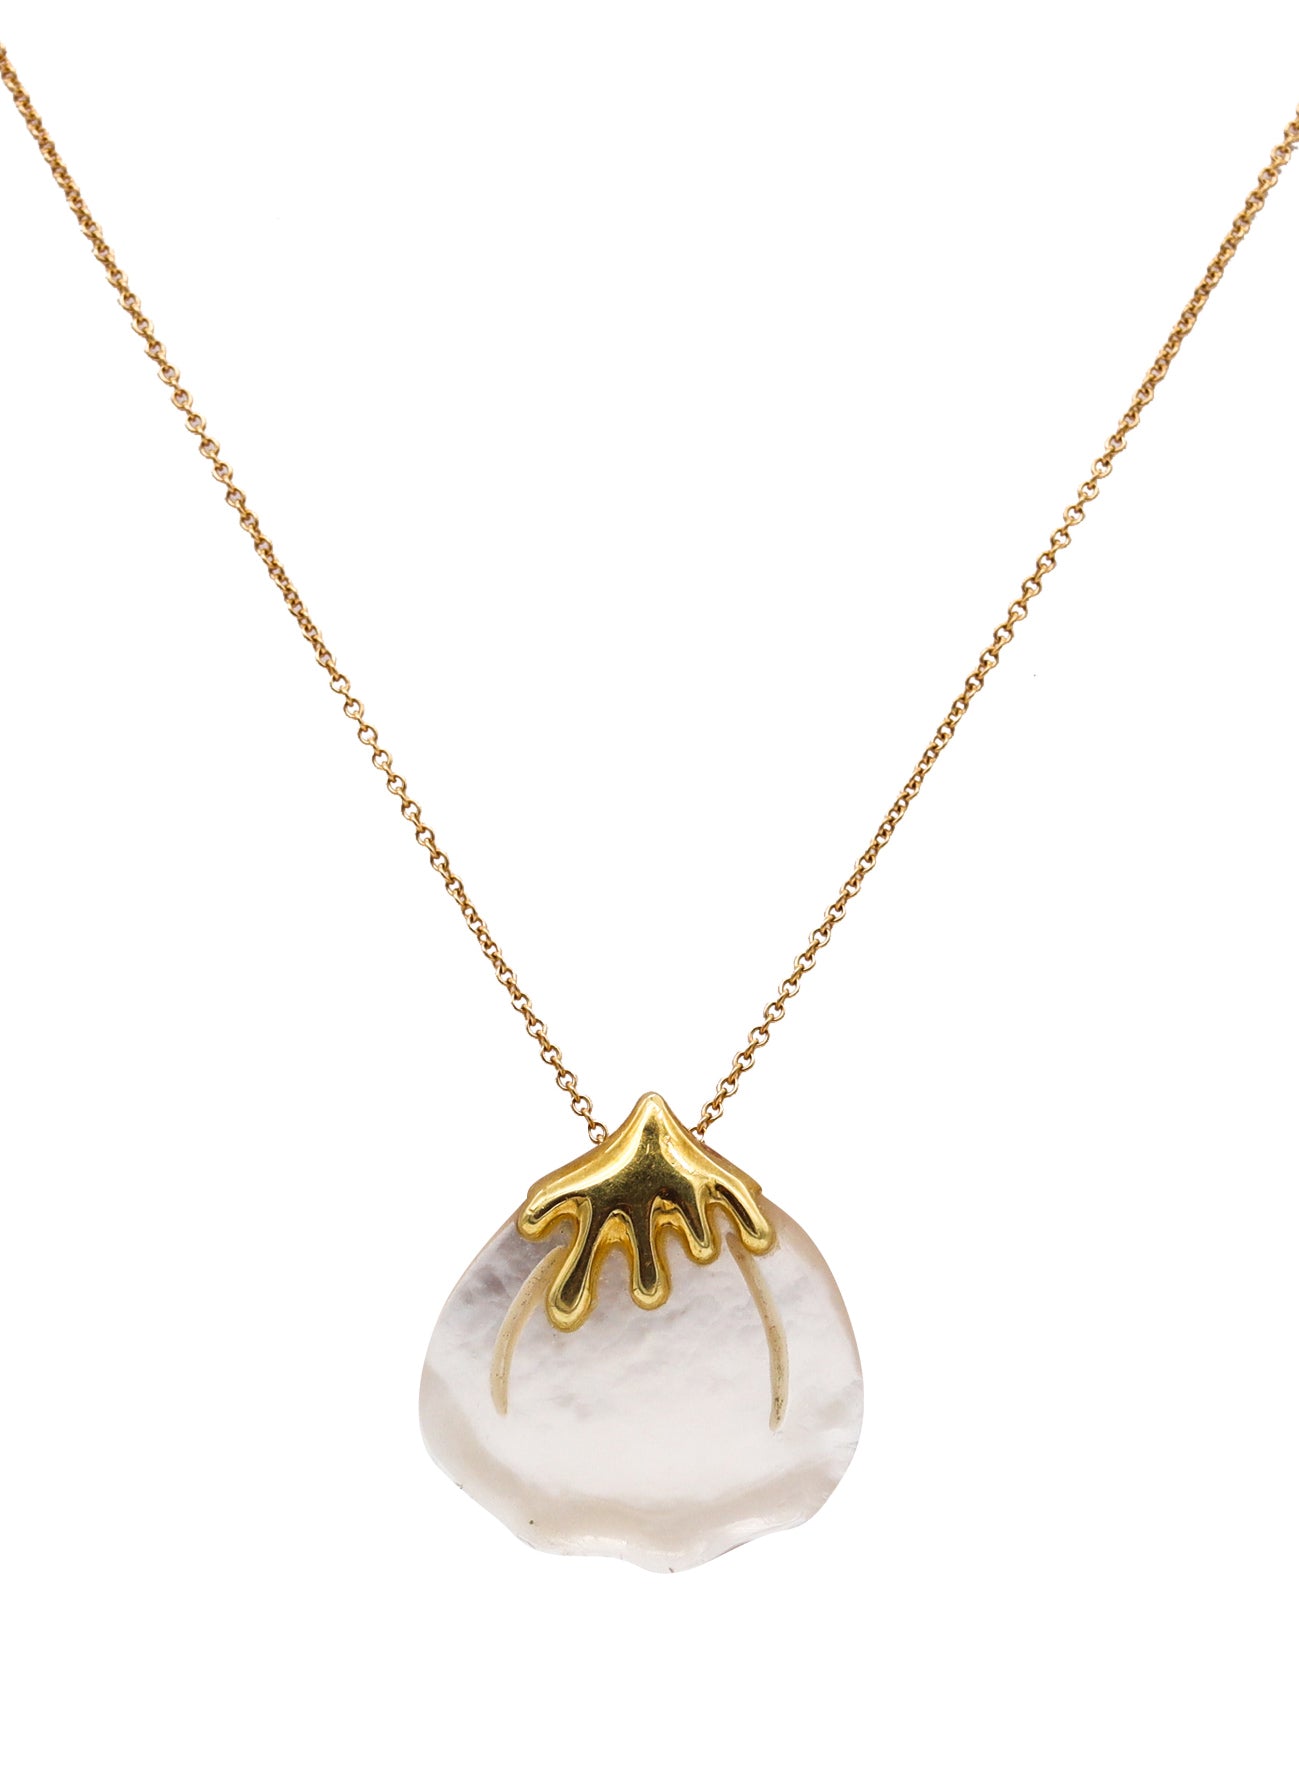 Tiffany & Co 1976 Angela Cummings White Nacre Petal Necklace In 18 Kt Yellow Gold